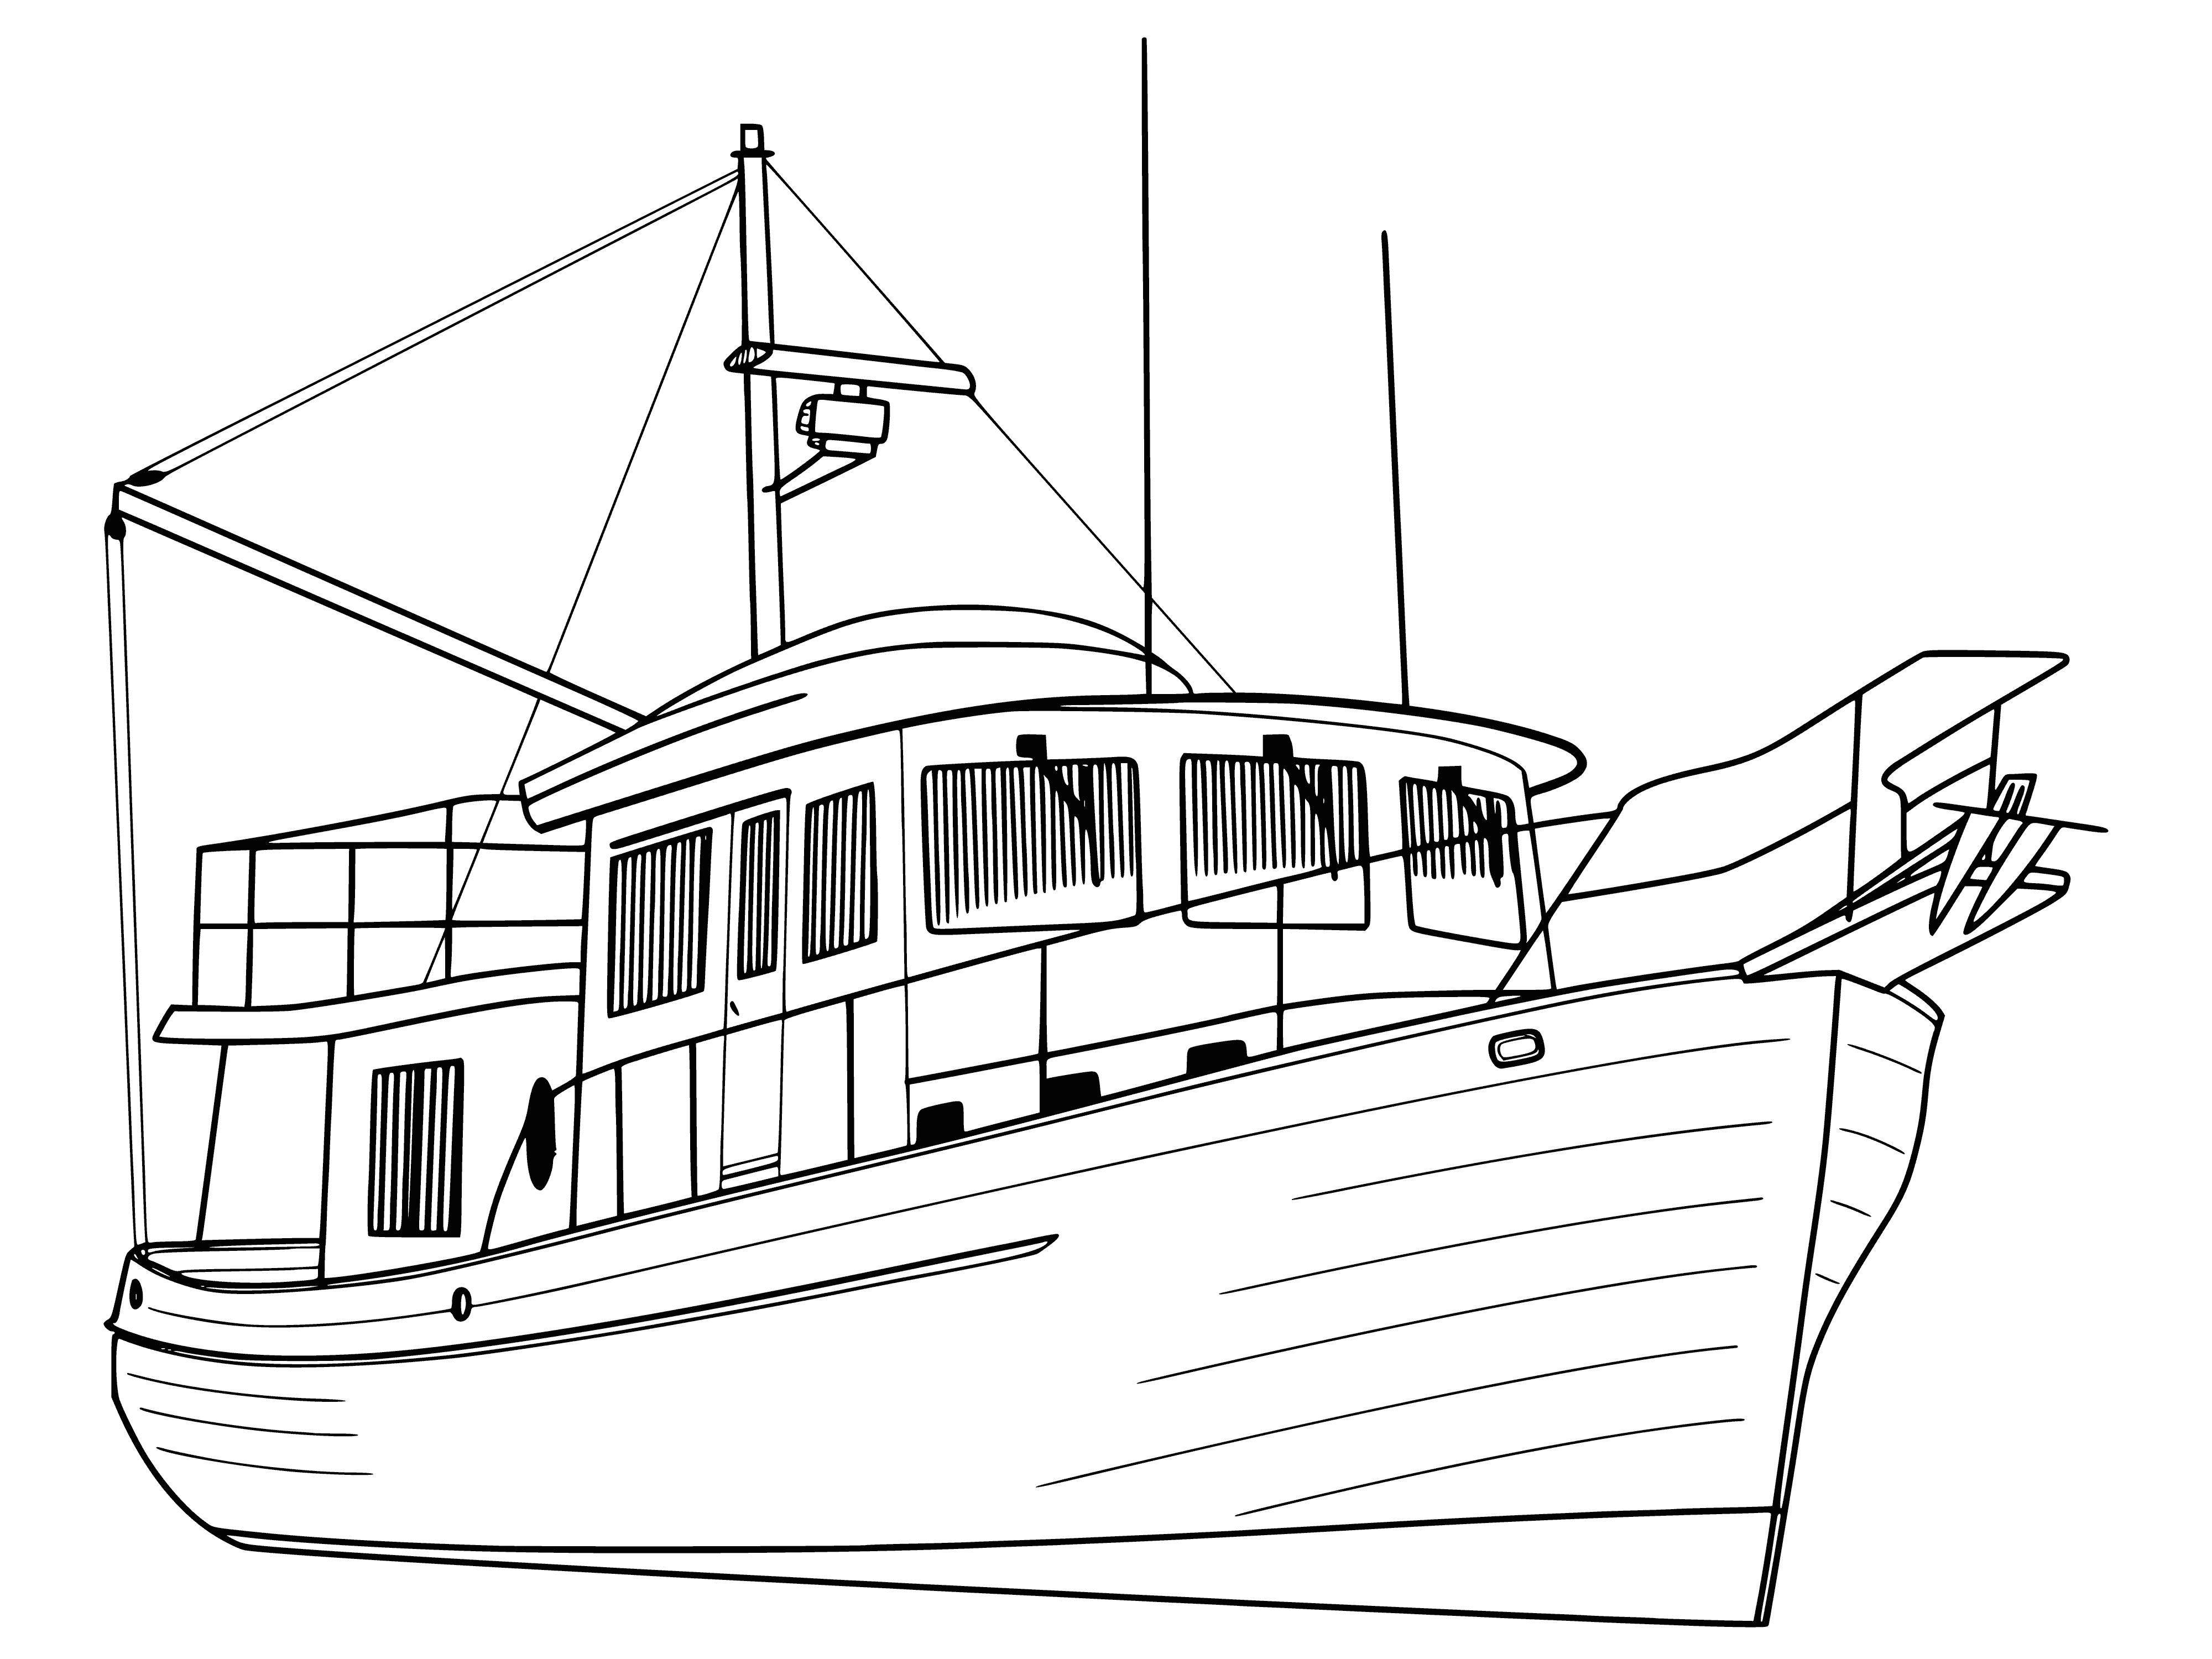 coloring page: Fishing boat designed to drag large net for catching fish; usually have large open deck area for net & are usually big to carry sizable catch.